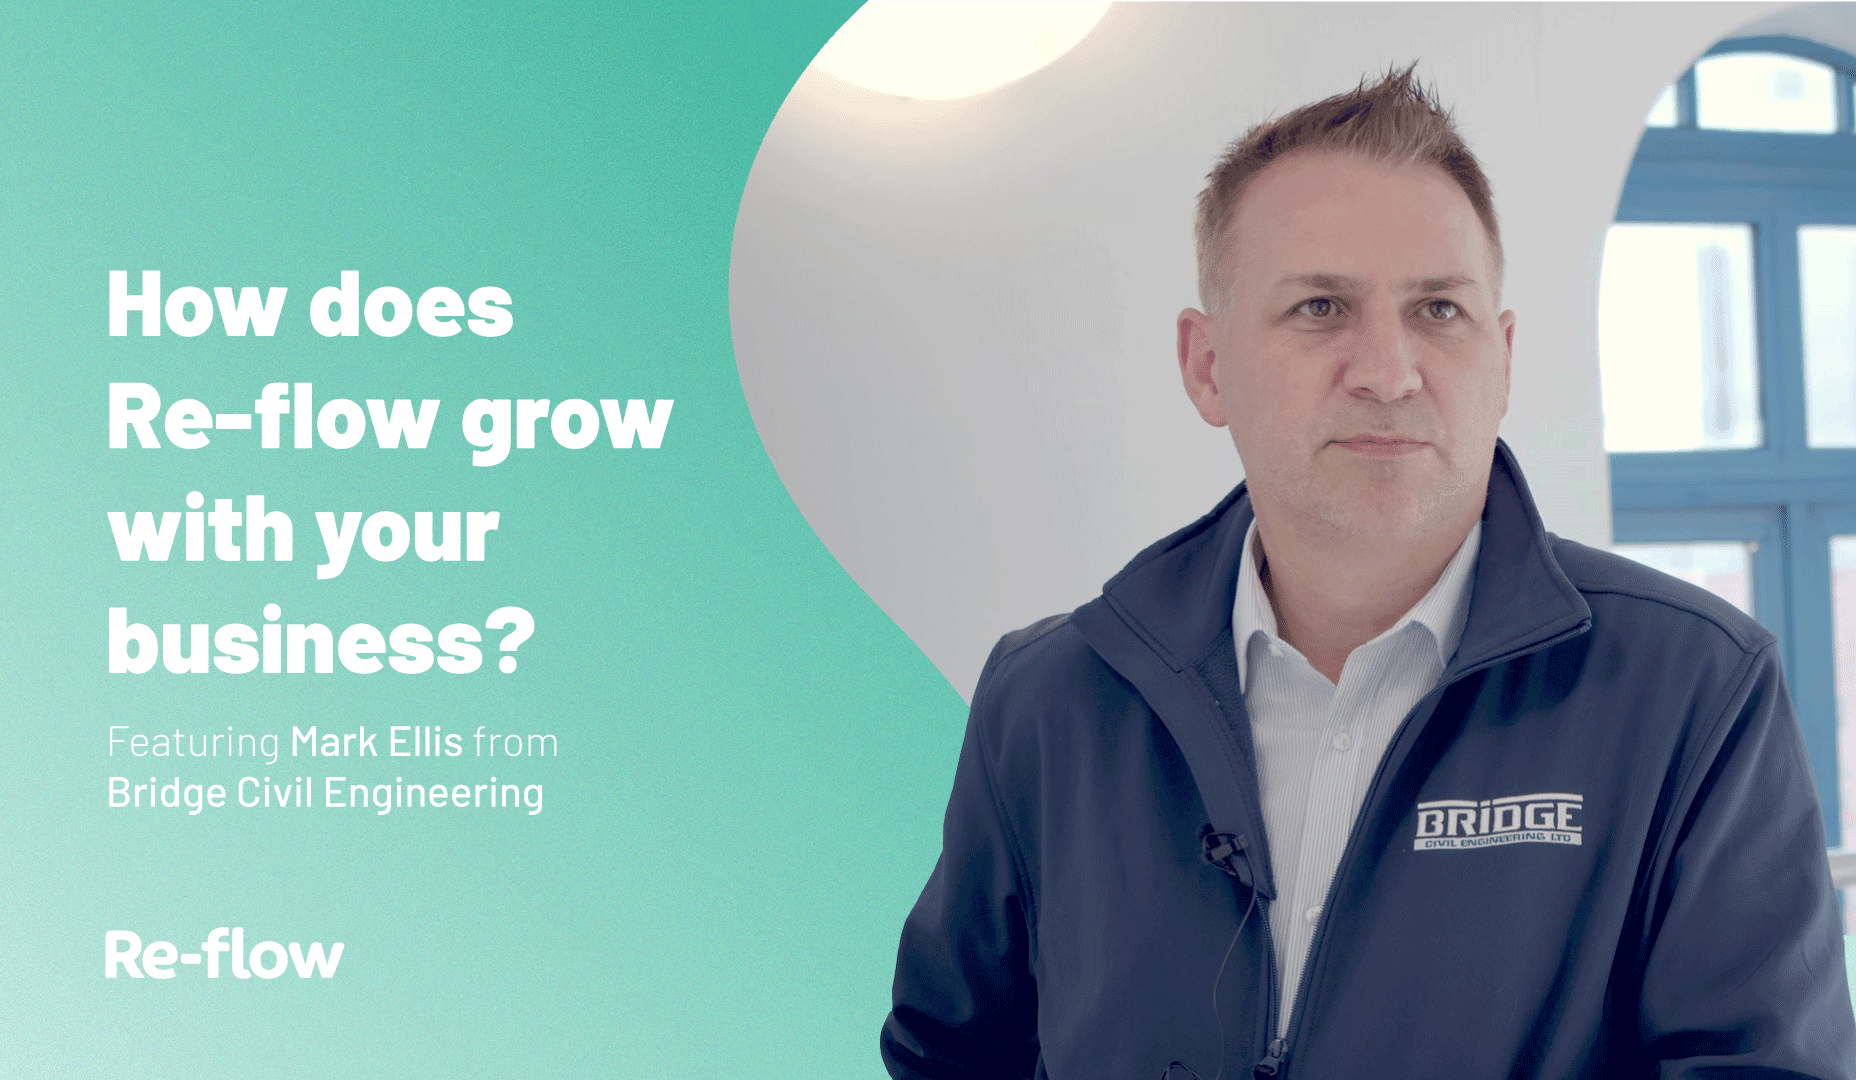 How does Re-flow grow with your business?